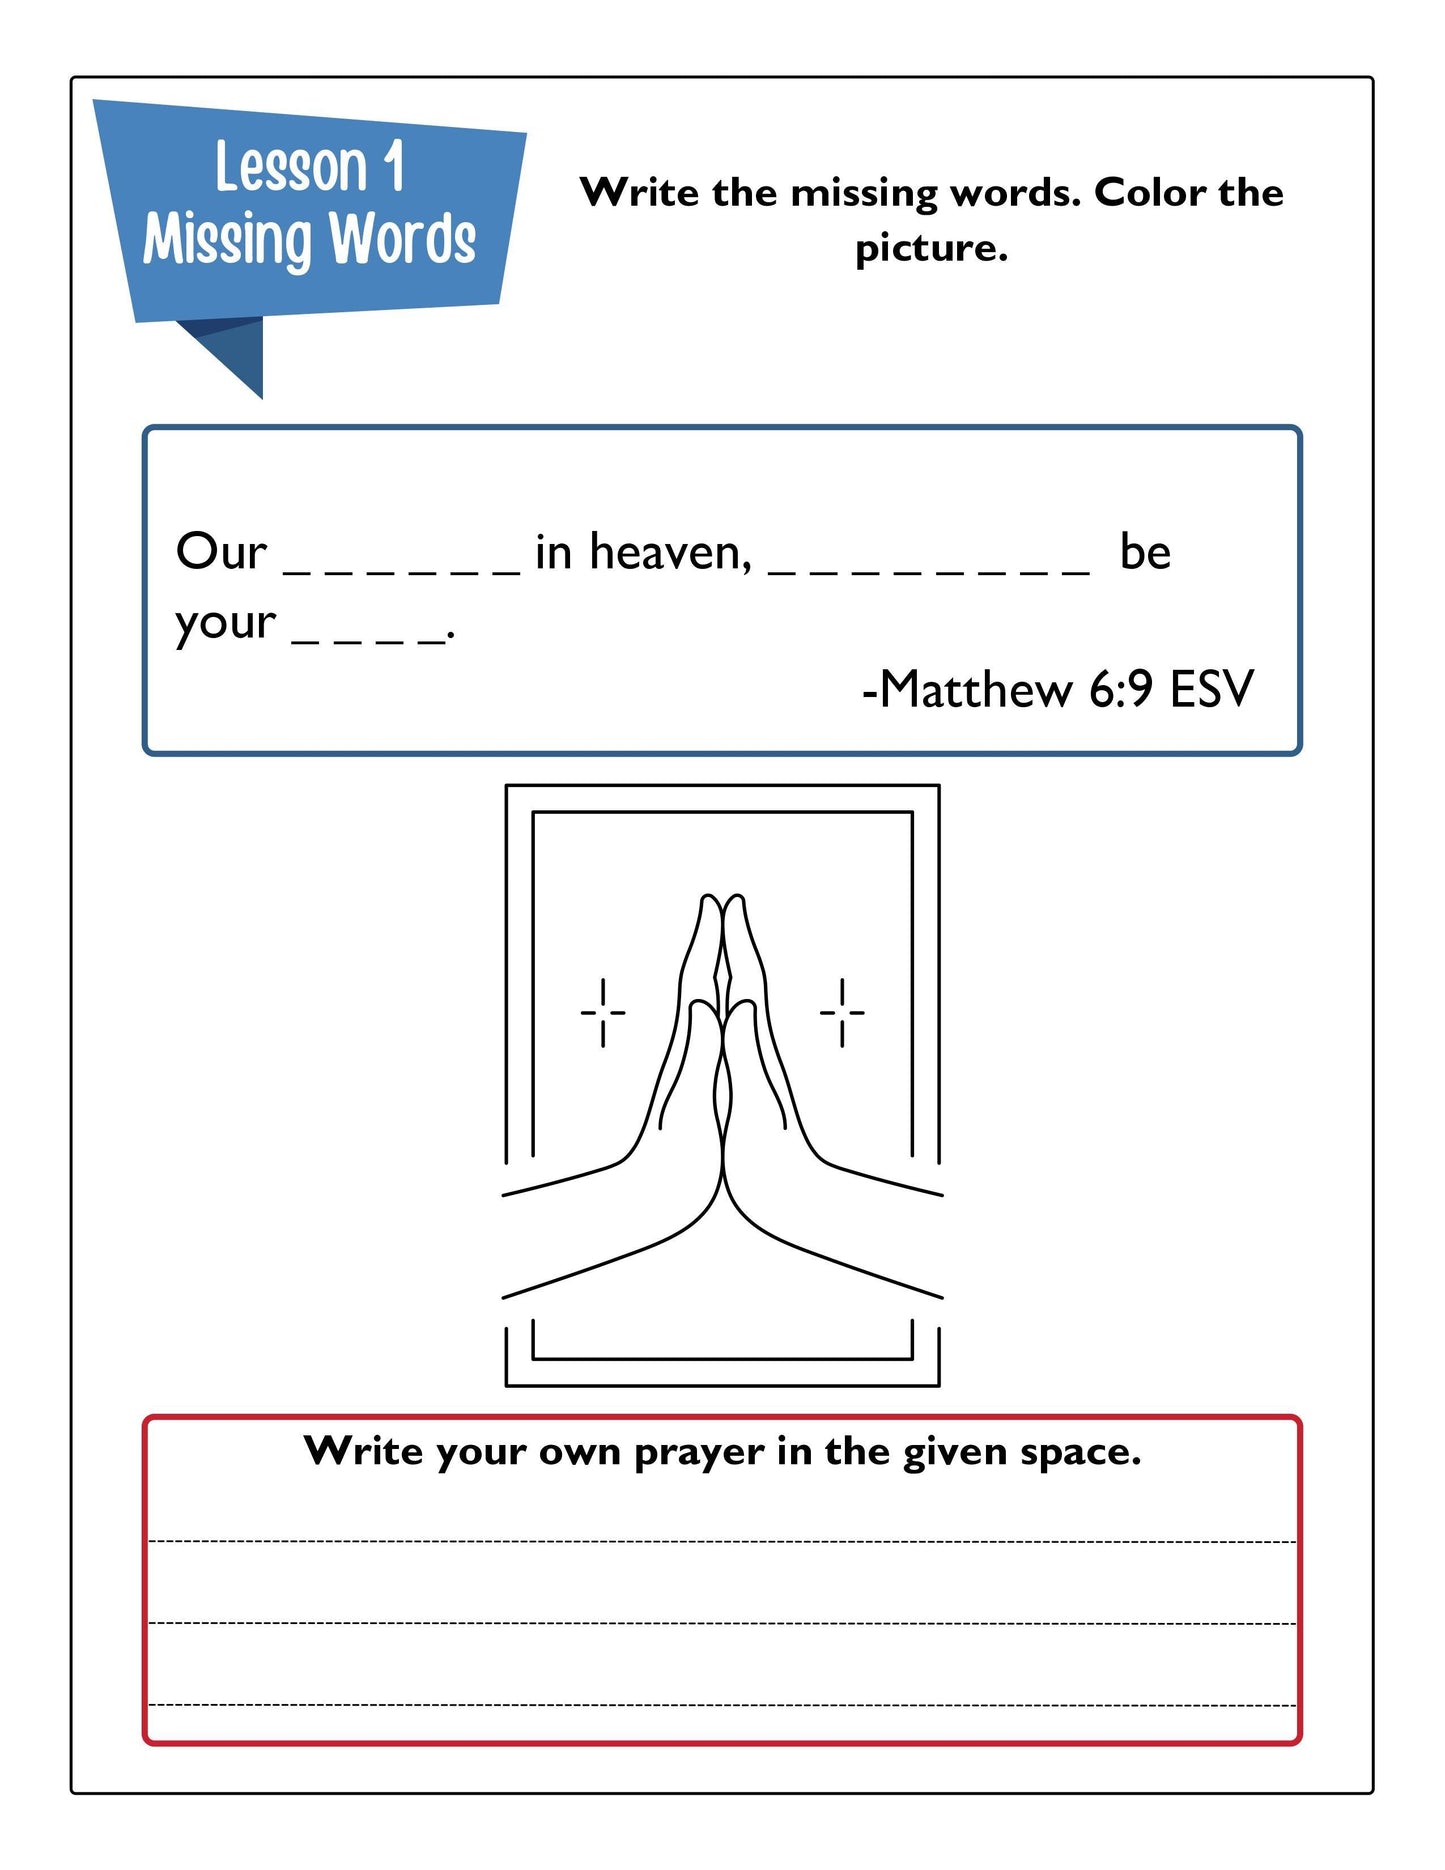 "Our Father" Free Lesson for Kids on the Lord's Prayer - Sunday School Store 